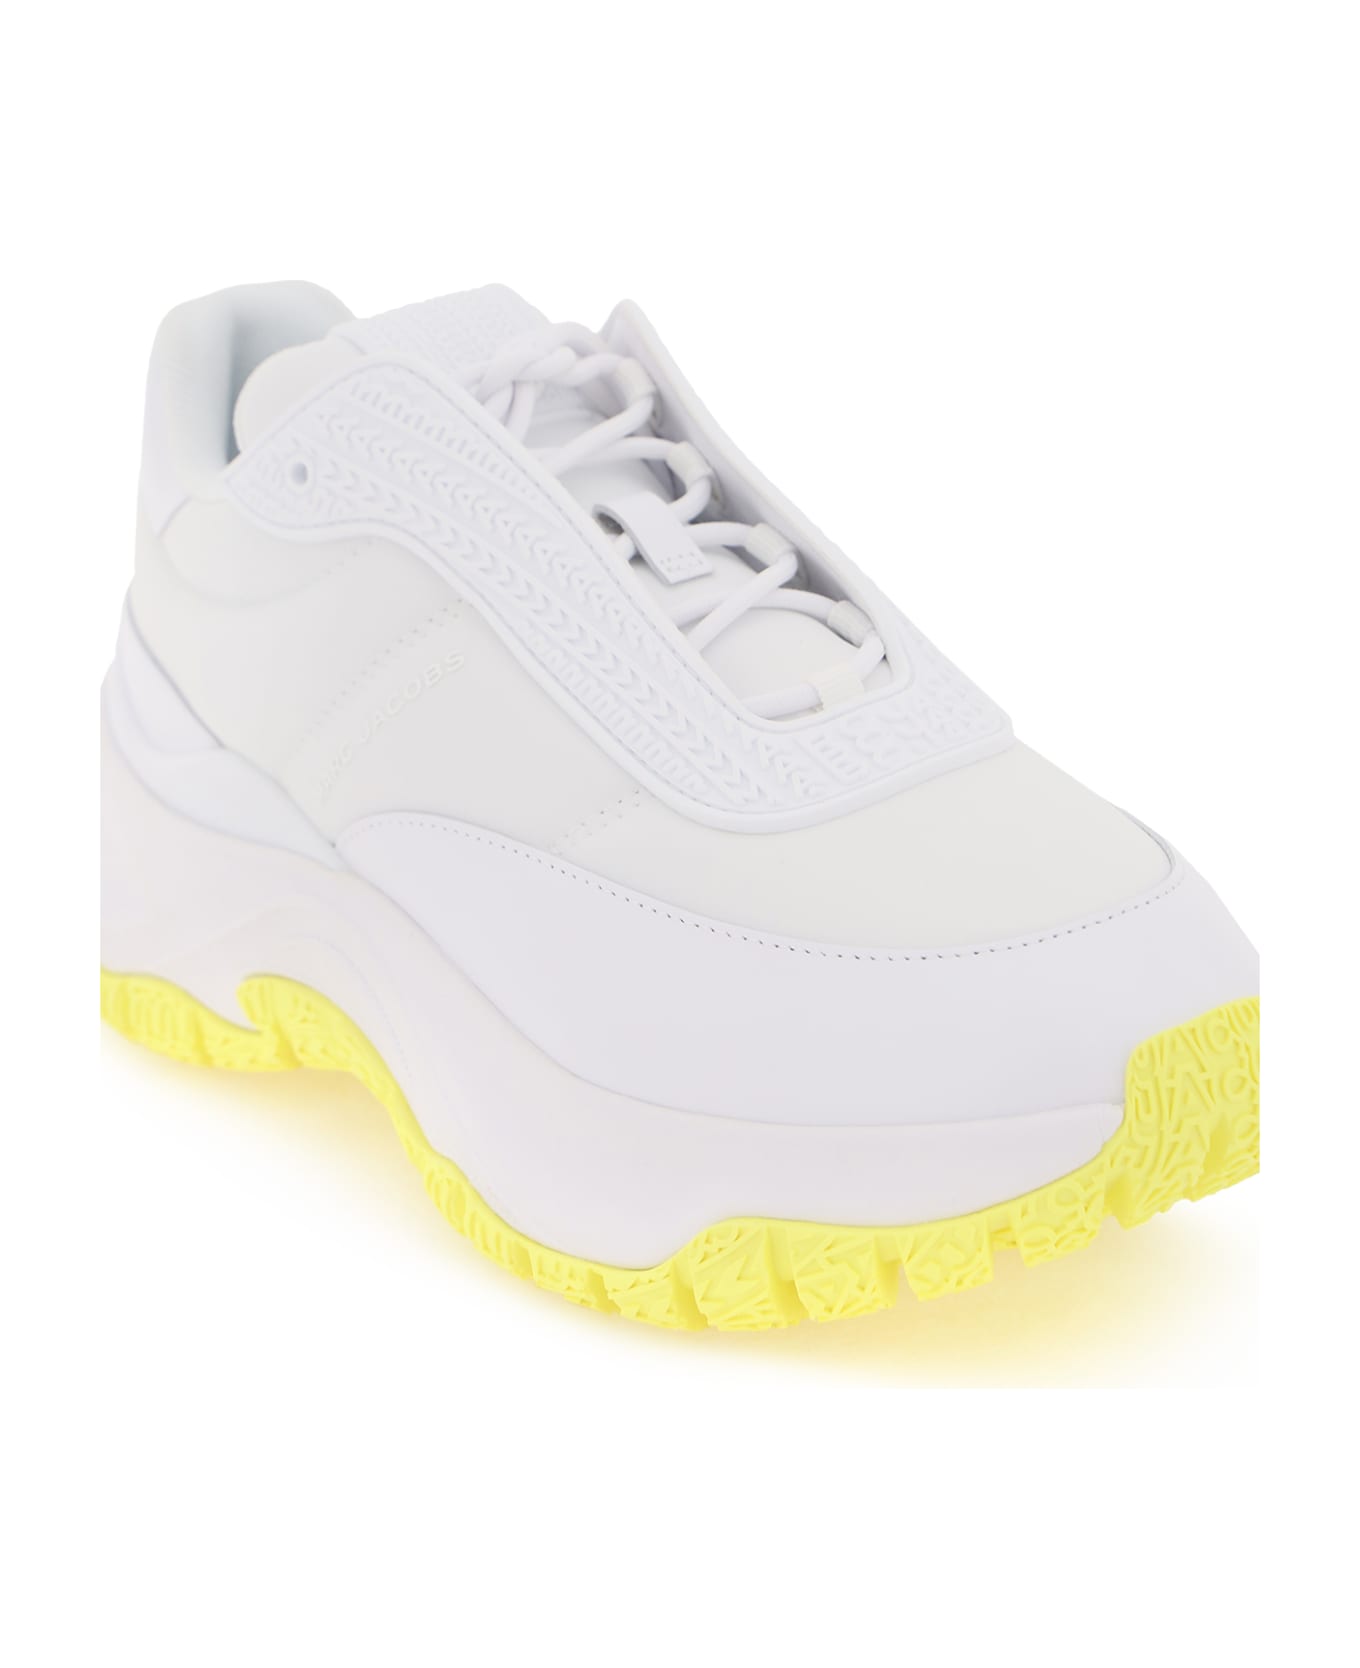 Marc Jacobs The Lazy Runner Sneakers - WHITE YELLOW (White) ウェッジシューズ